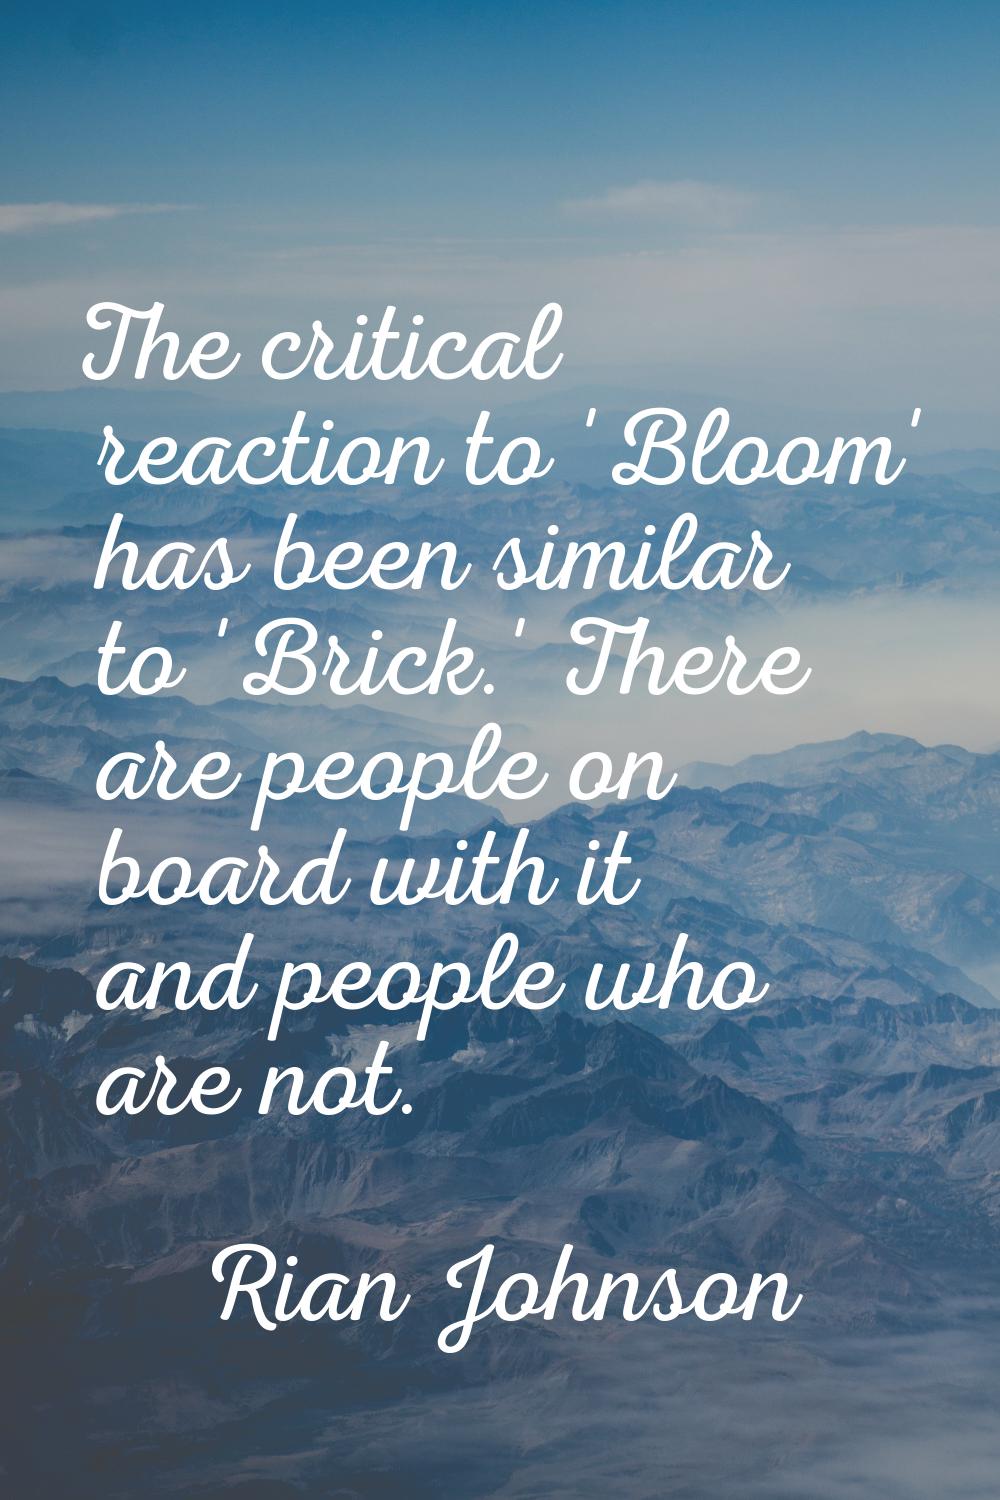 The critical reaction to 'Bloom' has been similar to 'Brick.' There are people on board with it and